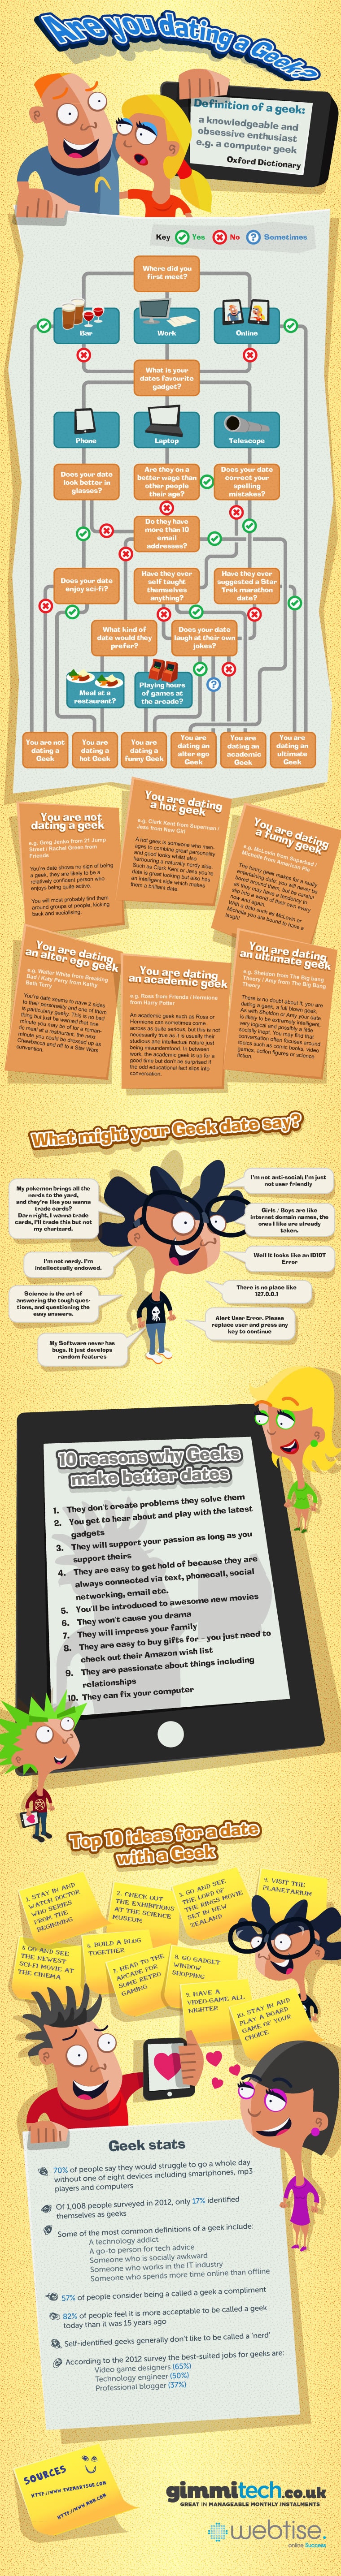 5 Types Of Geeks: Which One Are You Dating? [Infographic]